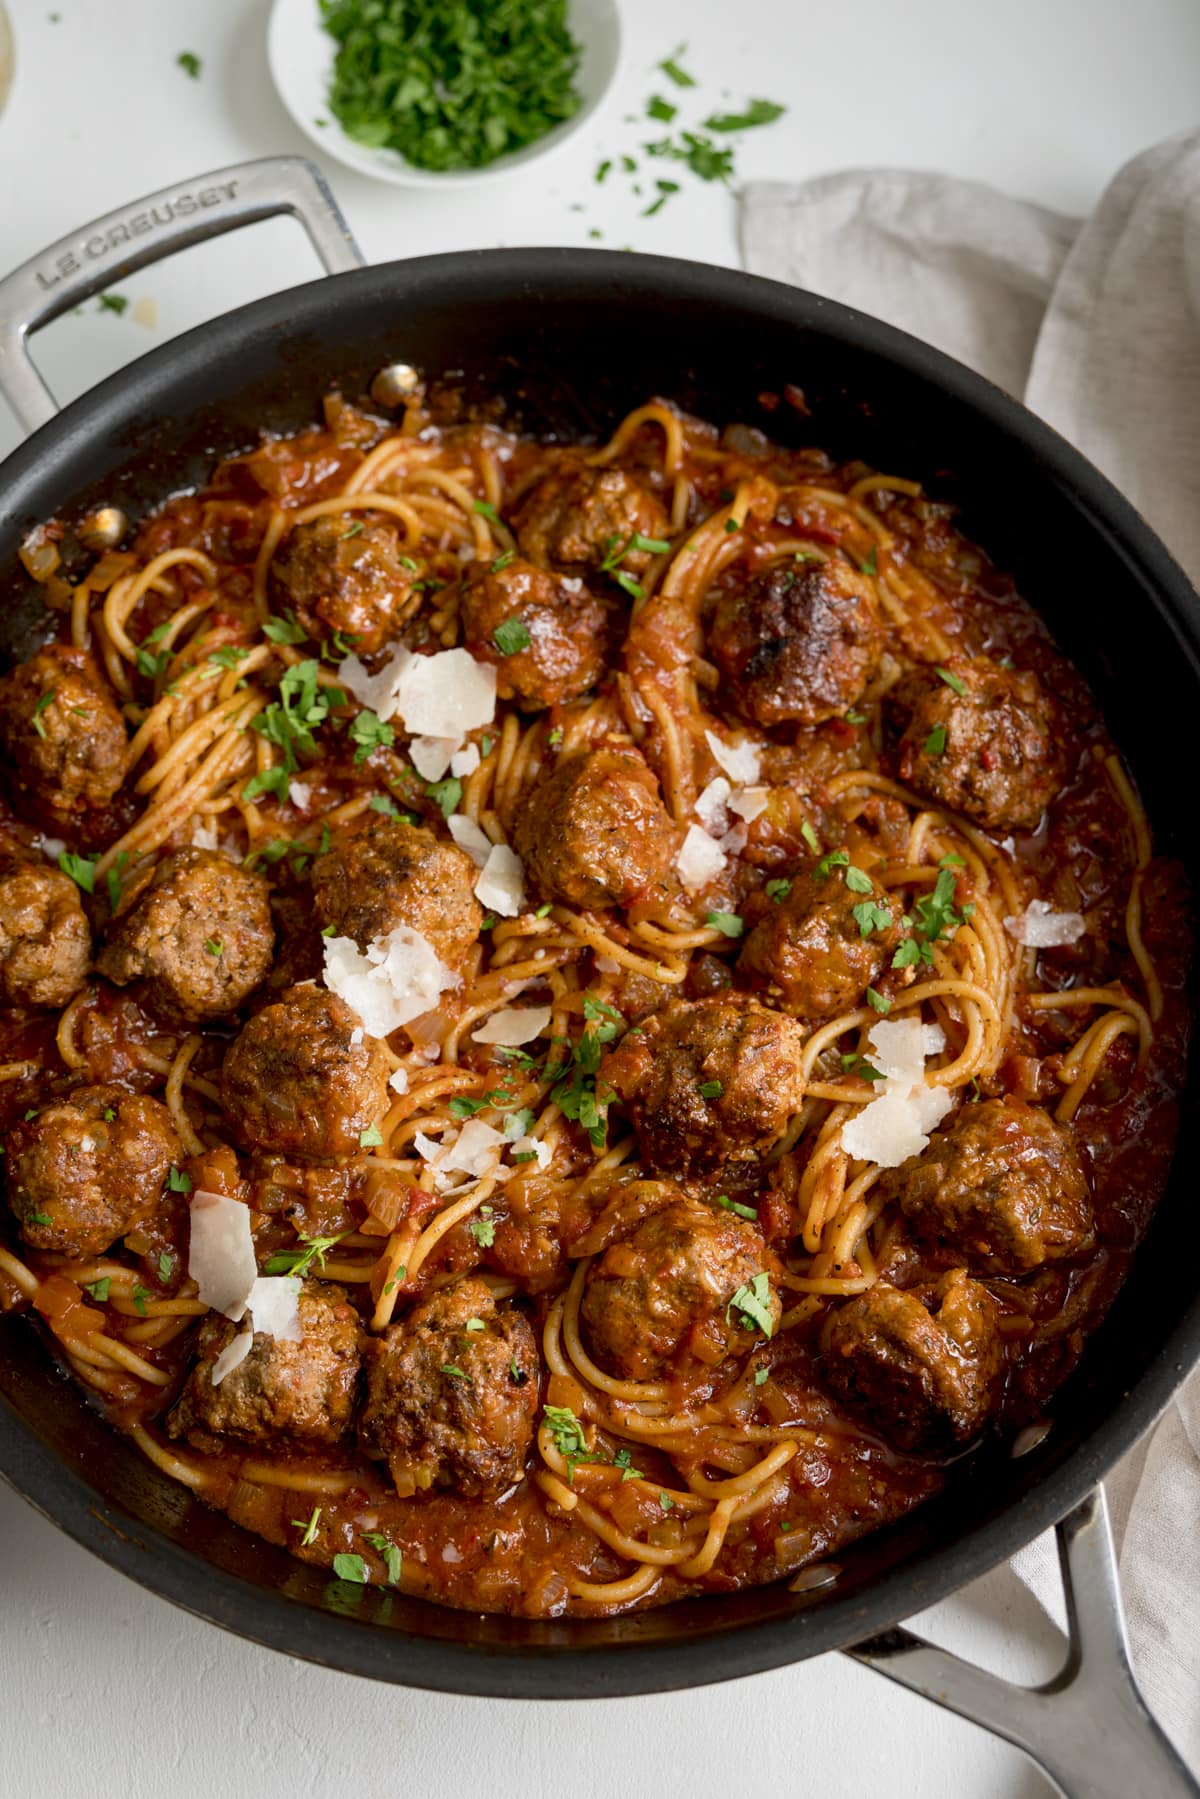 Overhead image of spaghetti and meatballs in a large skillet on a white background.  At the top of the picture is a small bowl of chopped parsley.